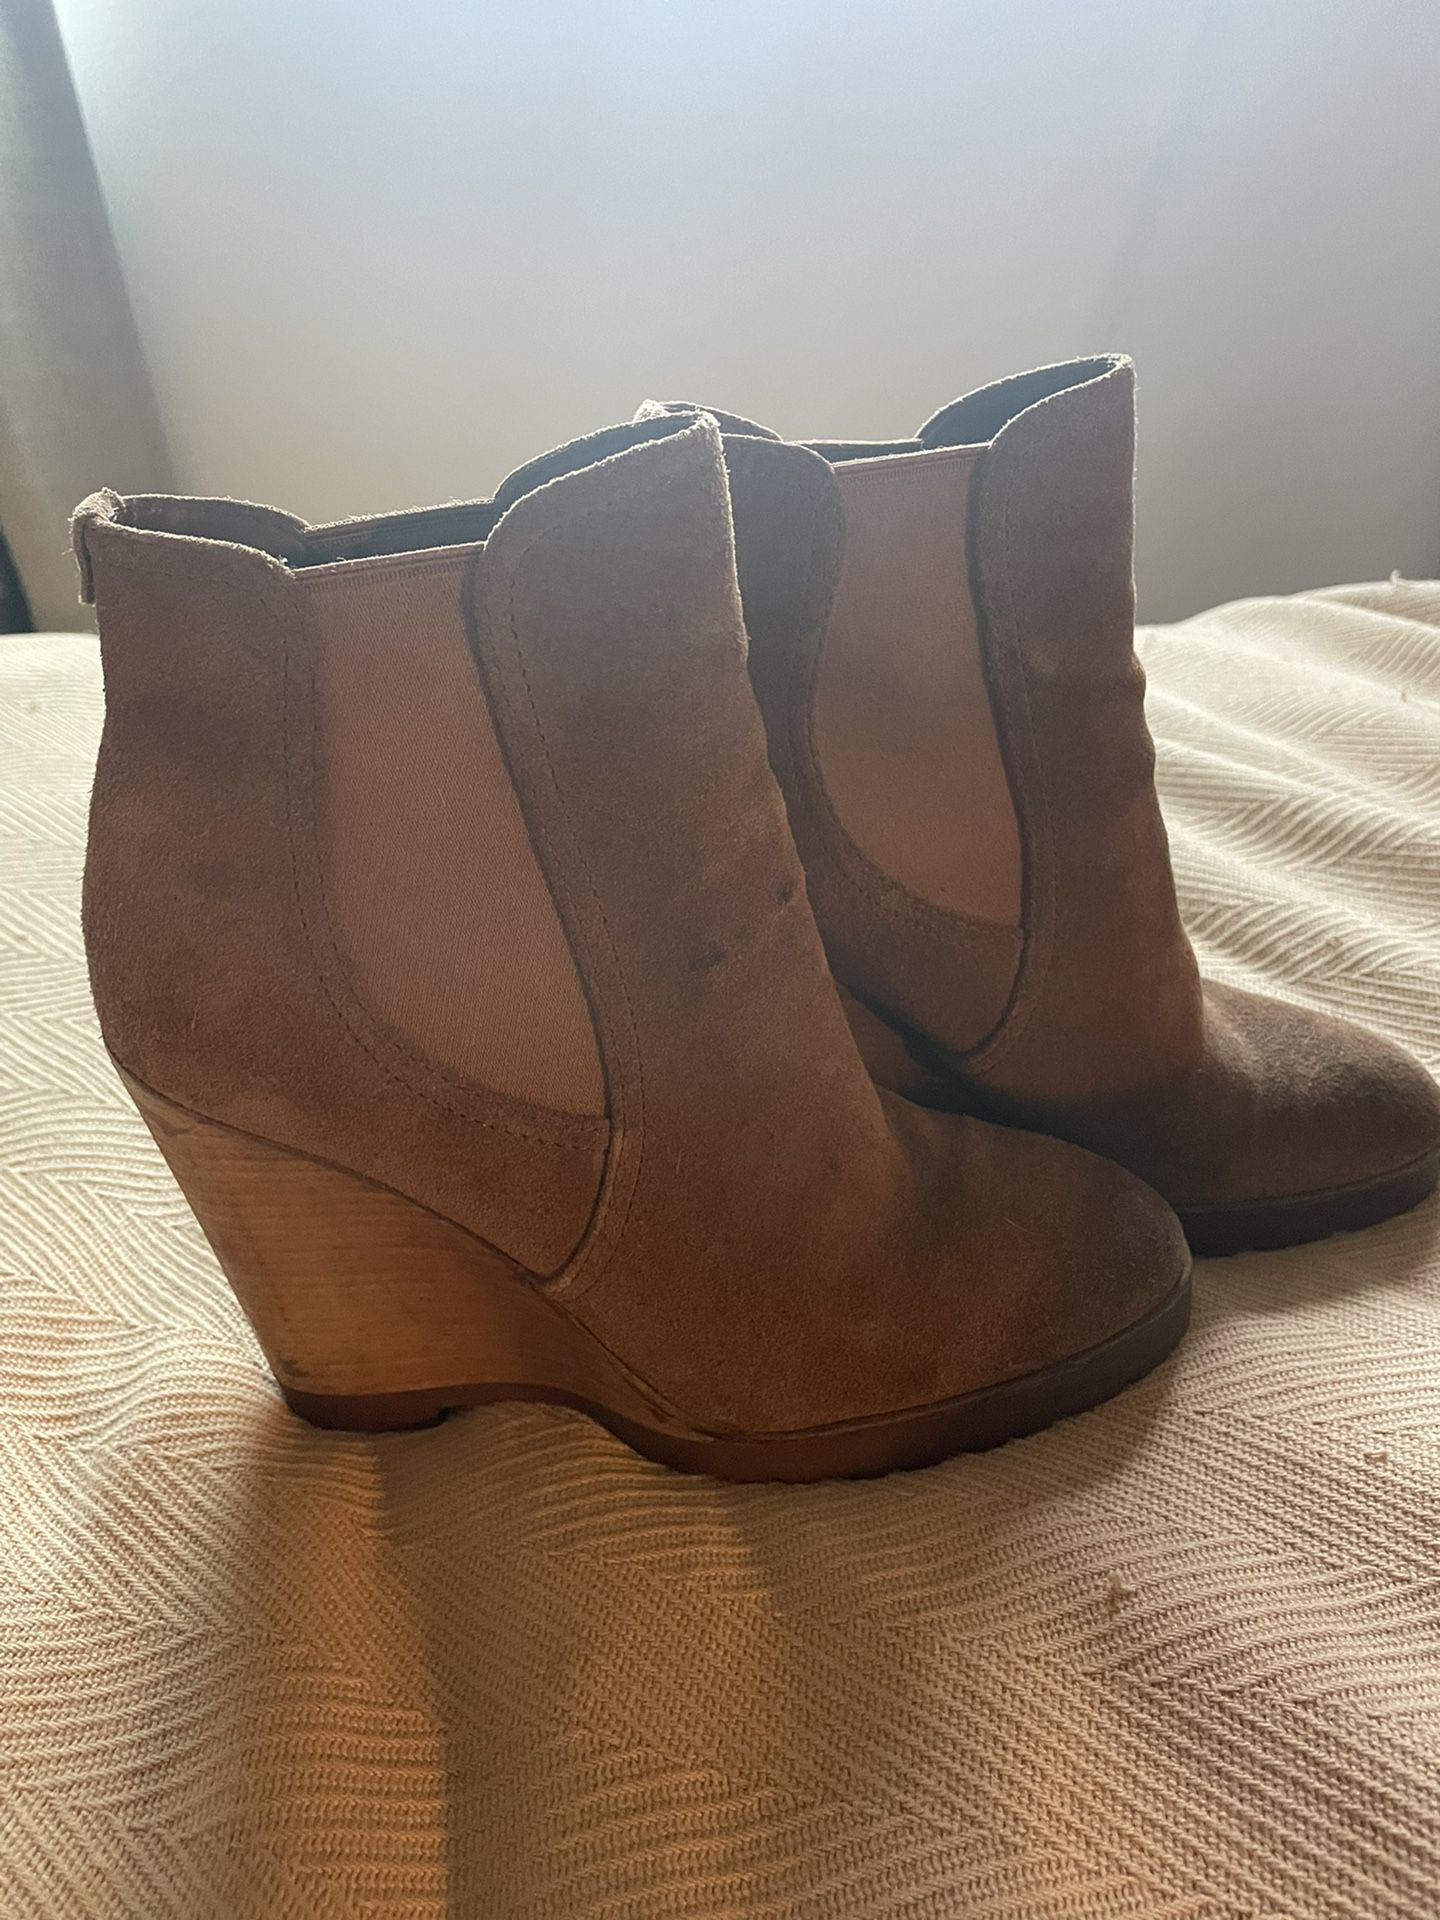 Micheal Kors 7 1/2  Wedge Boots